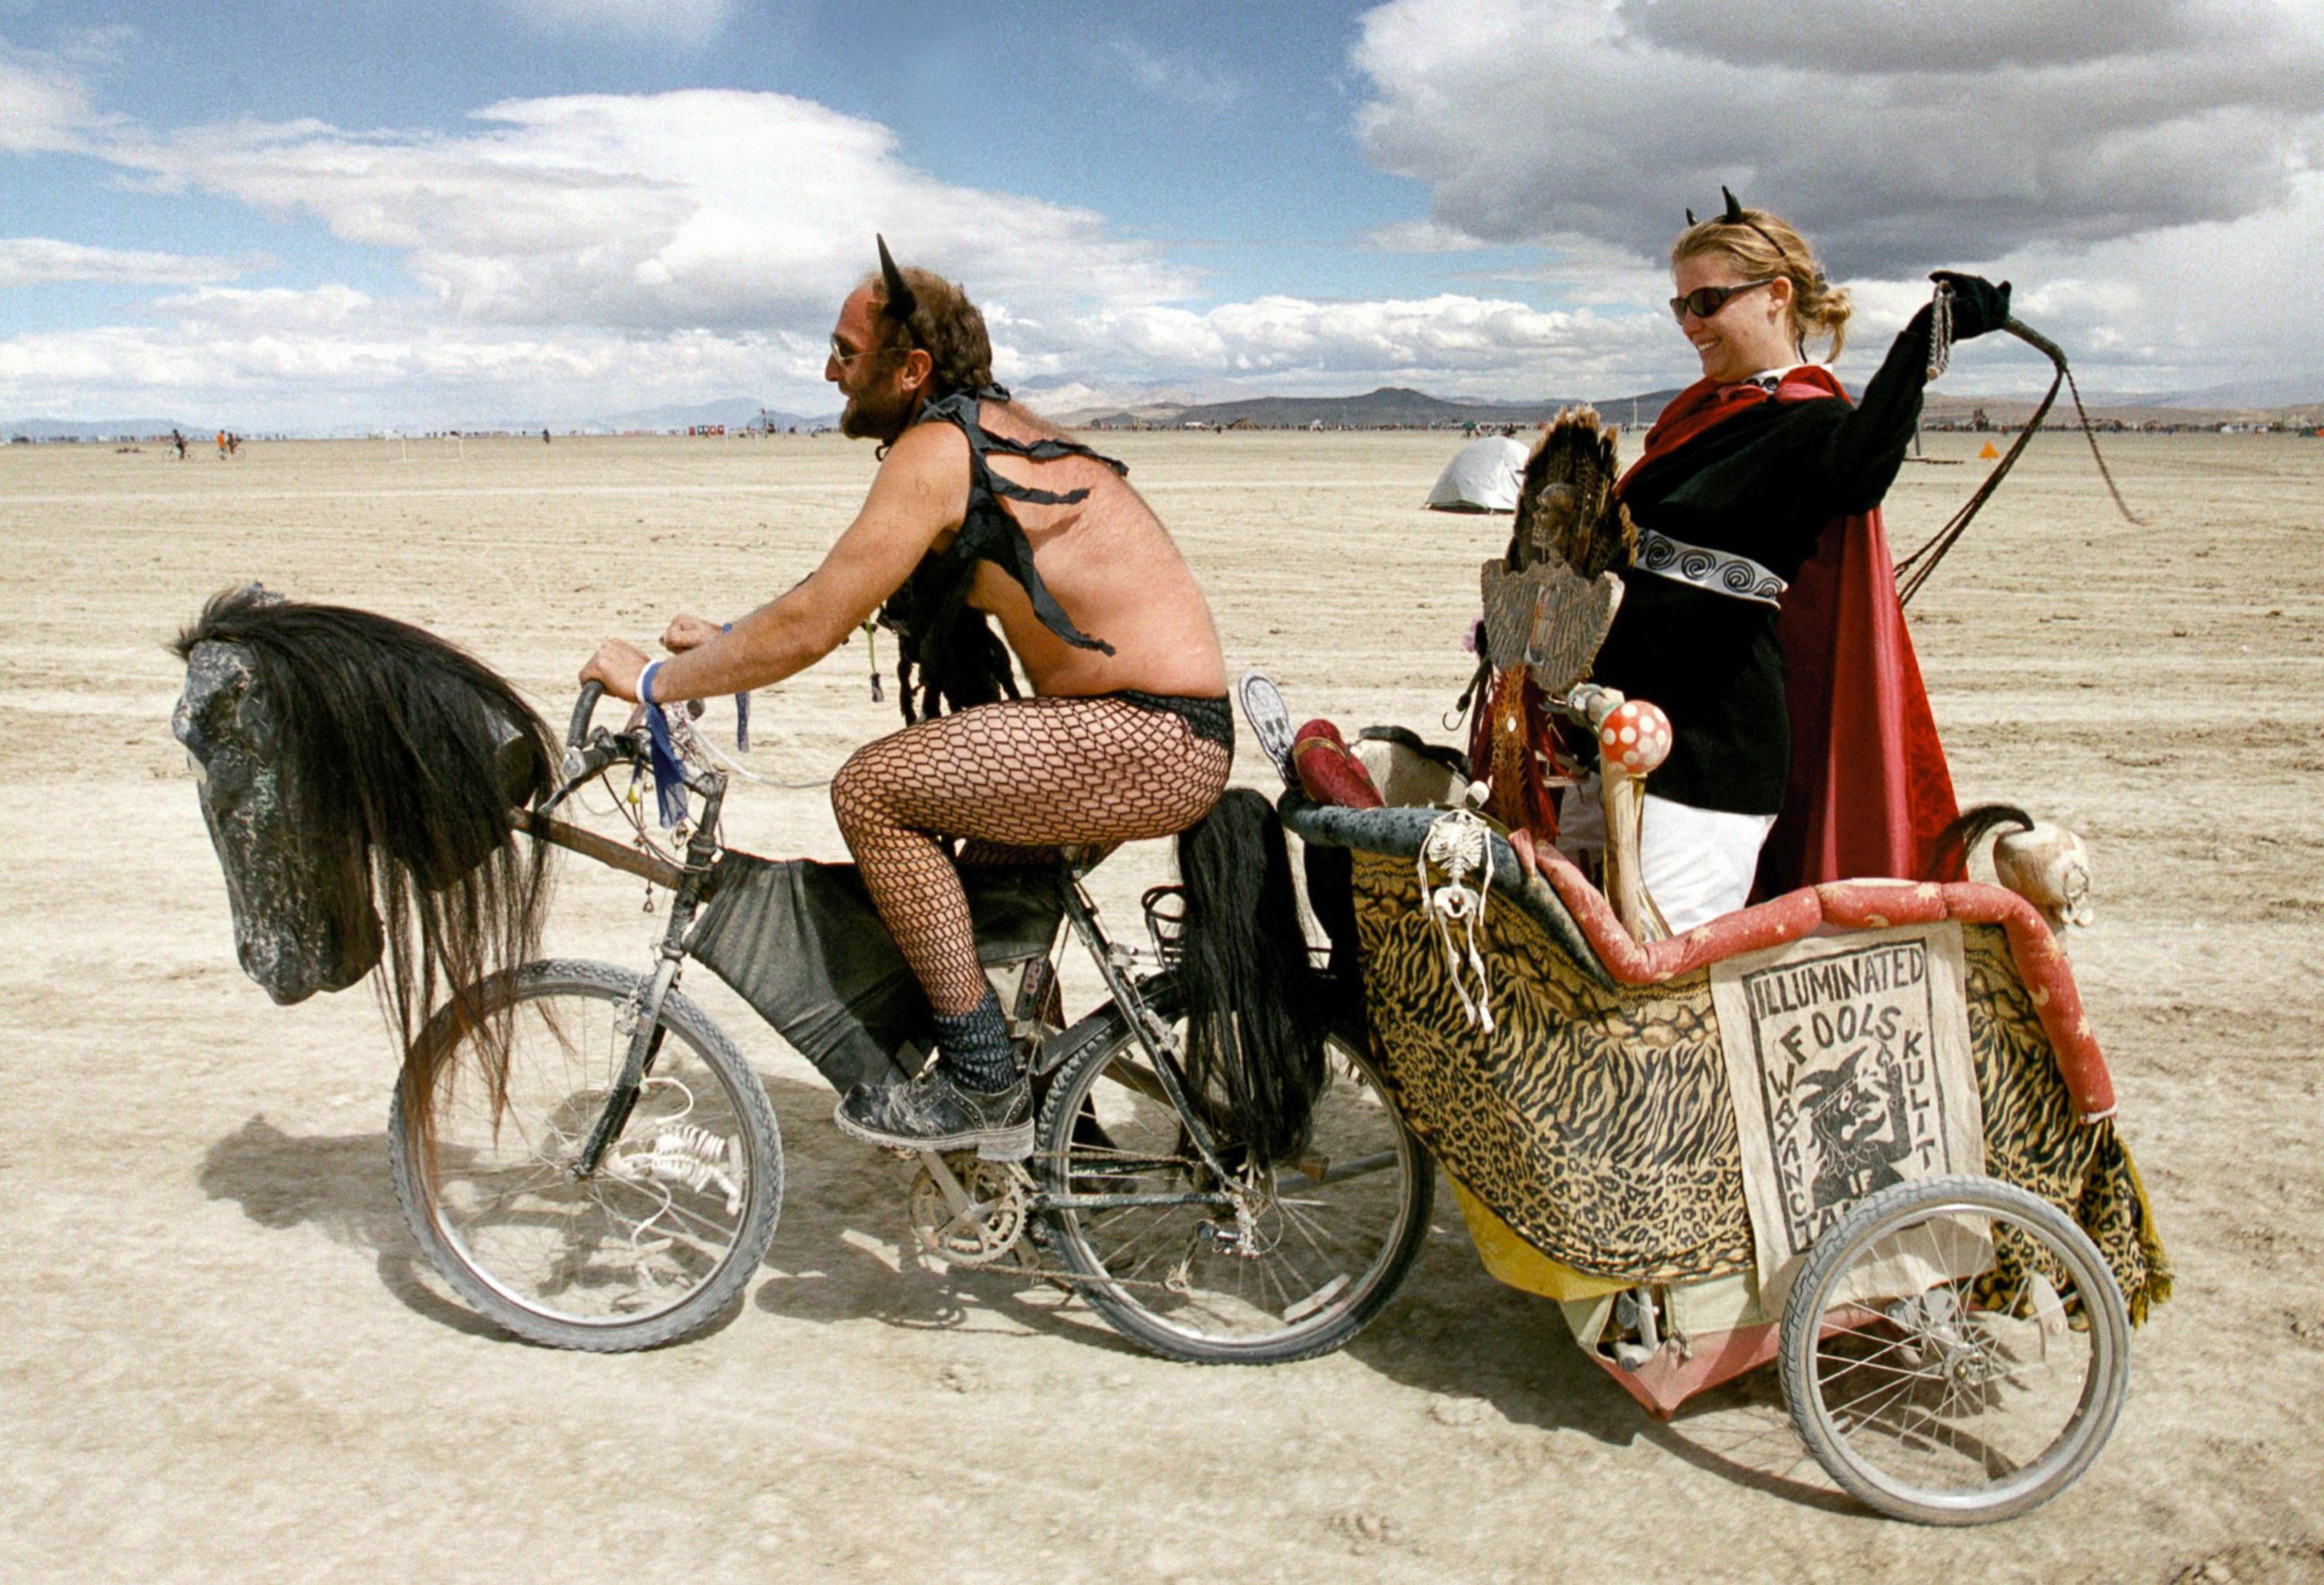 PHOTO: A dominating woman gets a chariot ride across the playa during the15th annual Burning Man festival September 2, 2000 in the Black Rock Desert near Gerlach, Nevada.